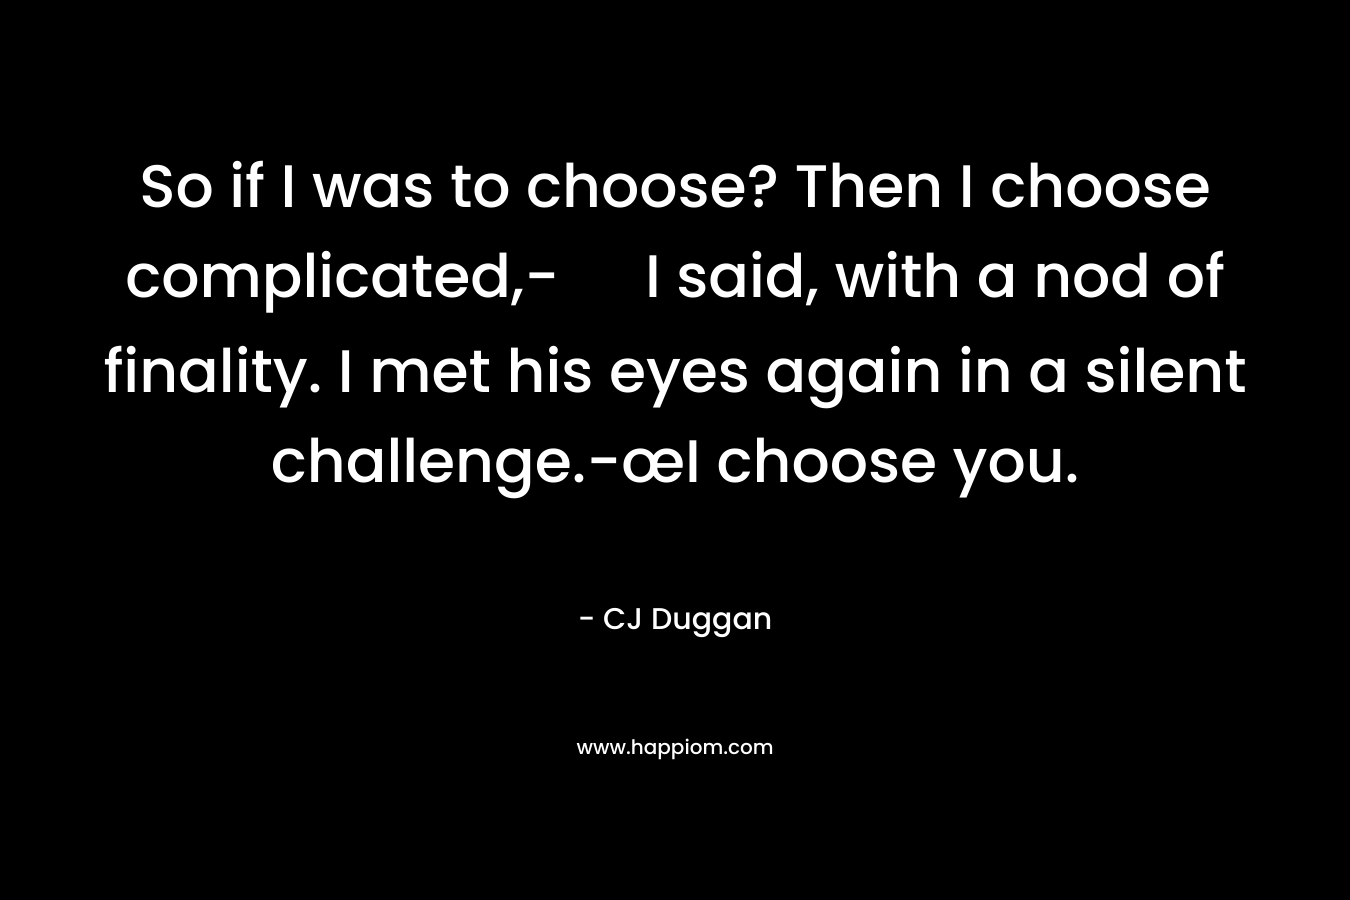 So if I was to choose? Then I choose complicated,- I said, with a nod of finality. I met his eyes again in a silent challenge.-œI choose you. – CJ Duggan